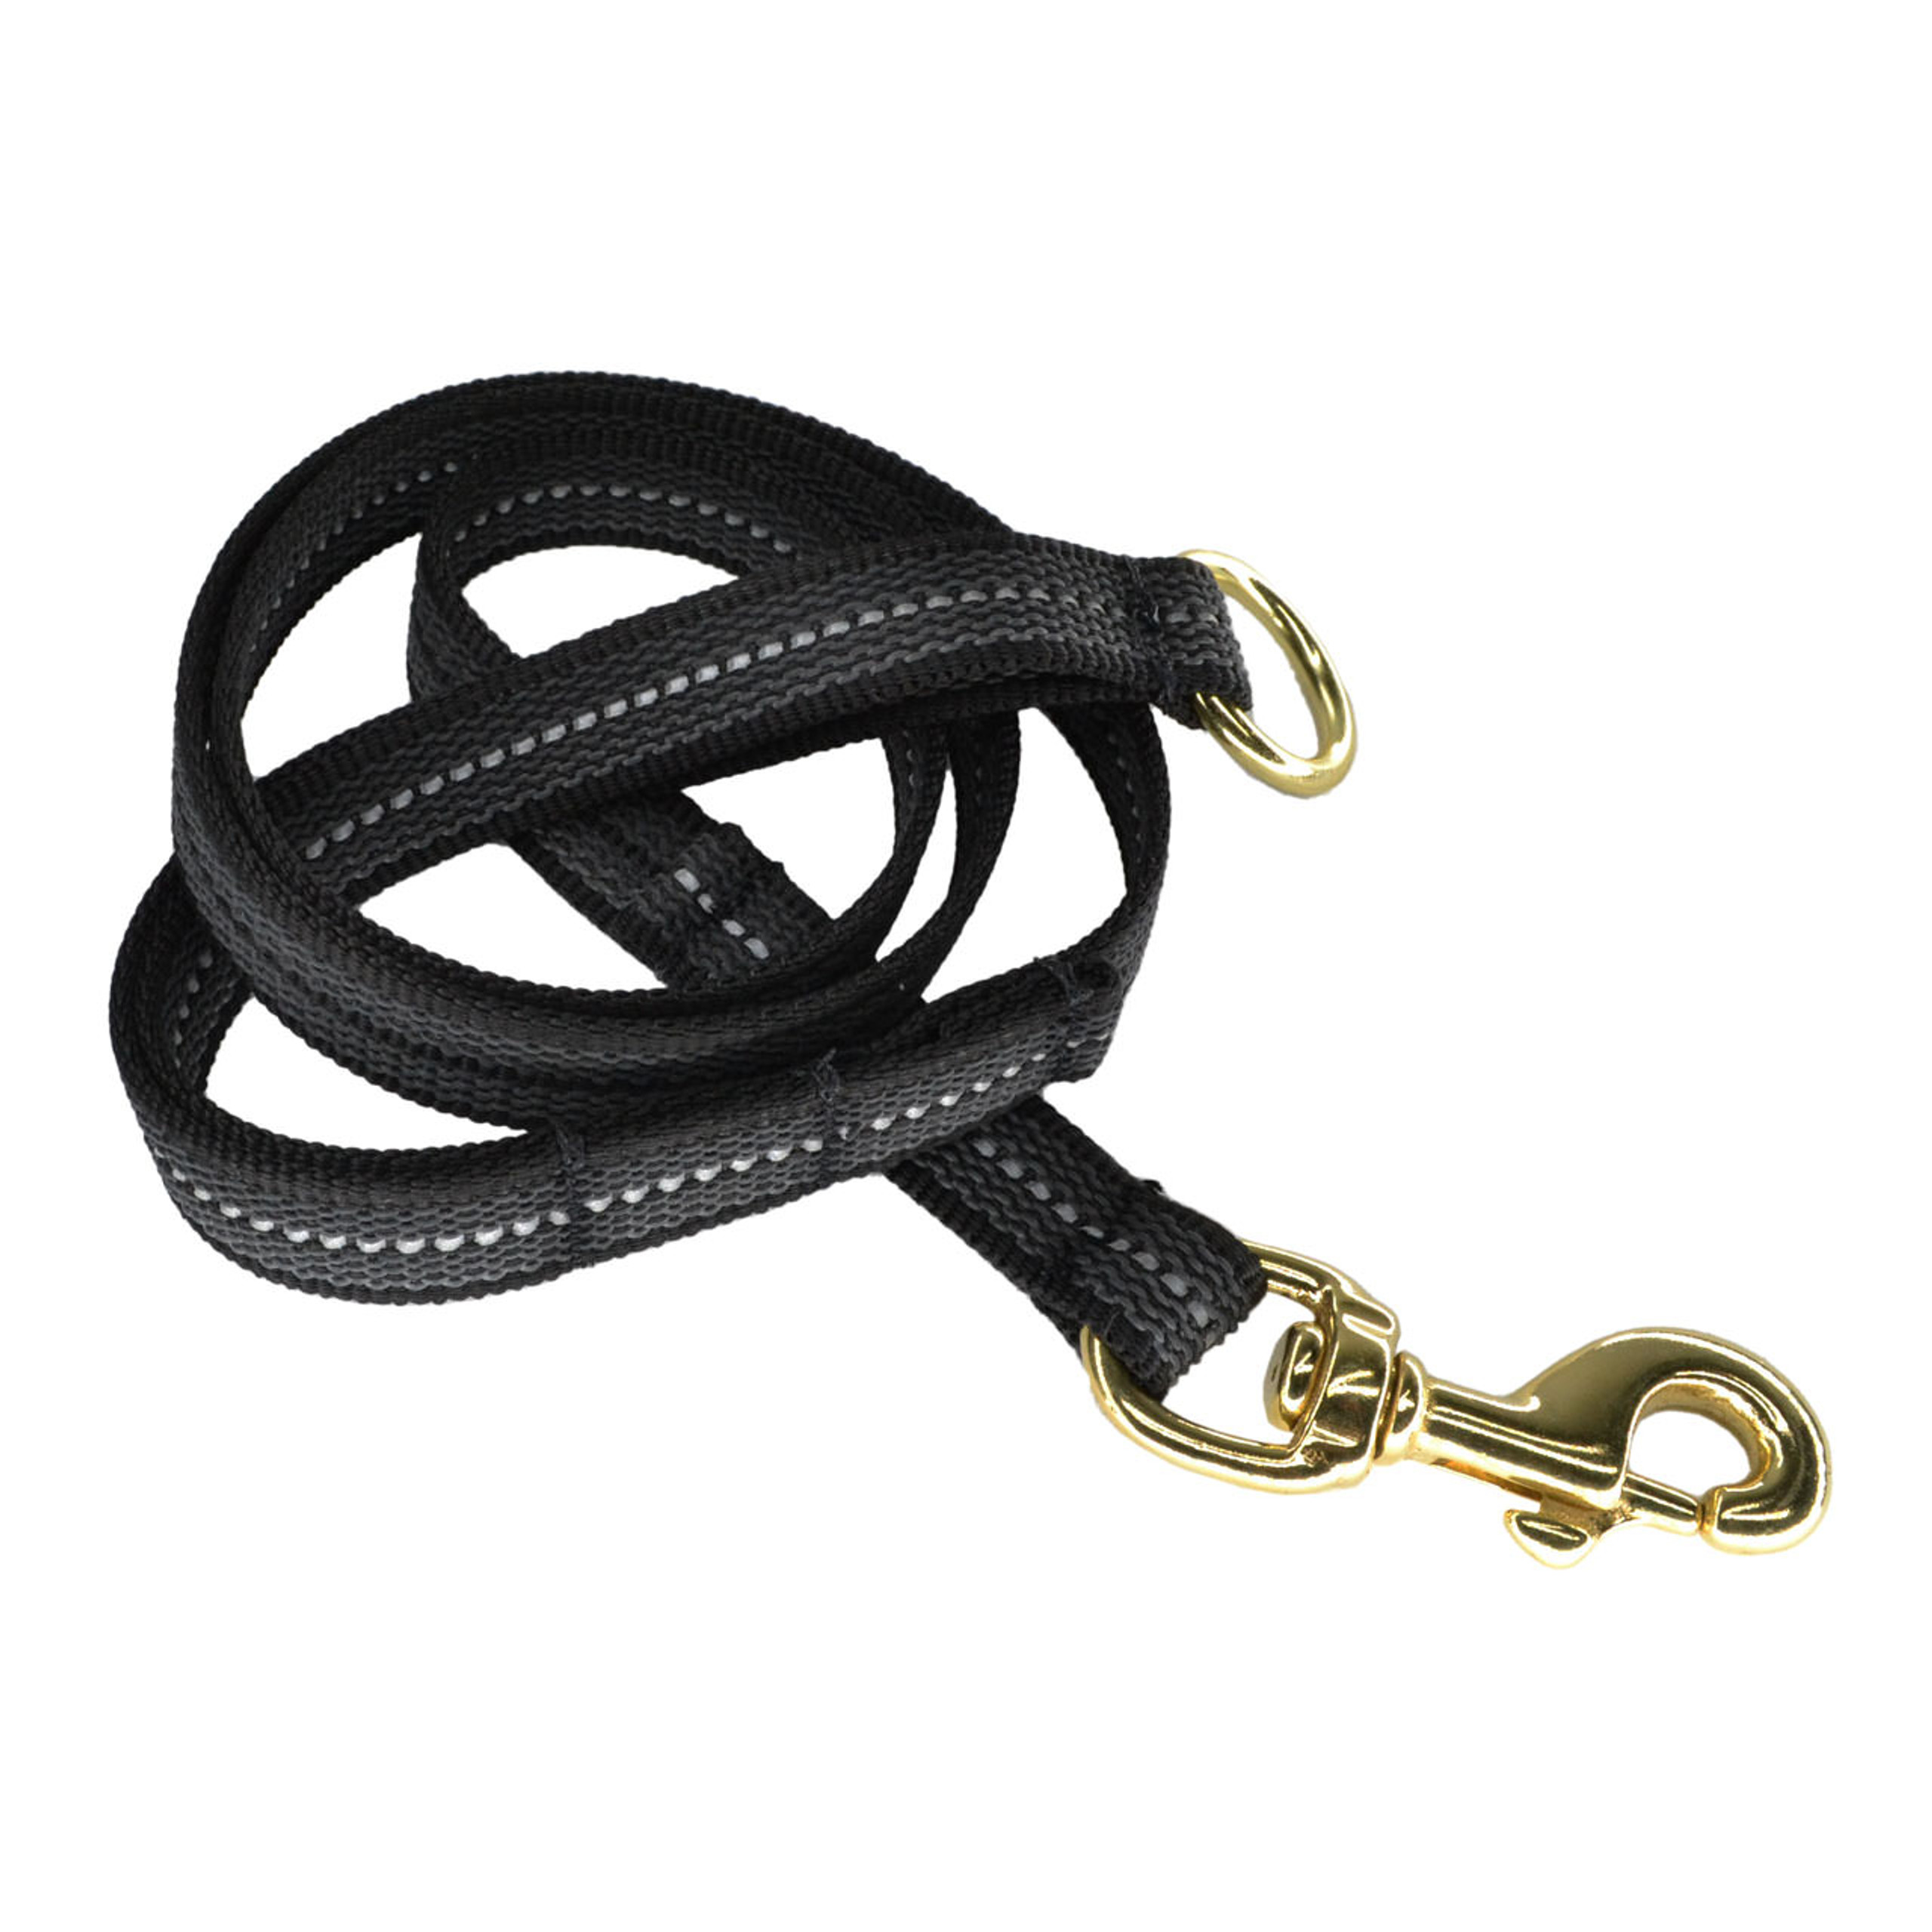 Grip-It Leashes | Agitation Leash for Dogs - Ray Allen Manufacturing